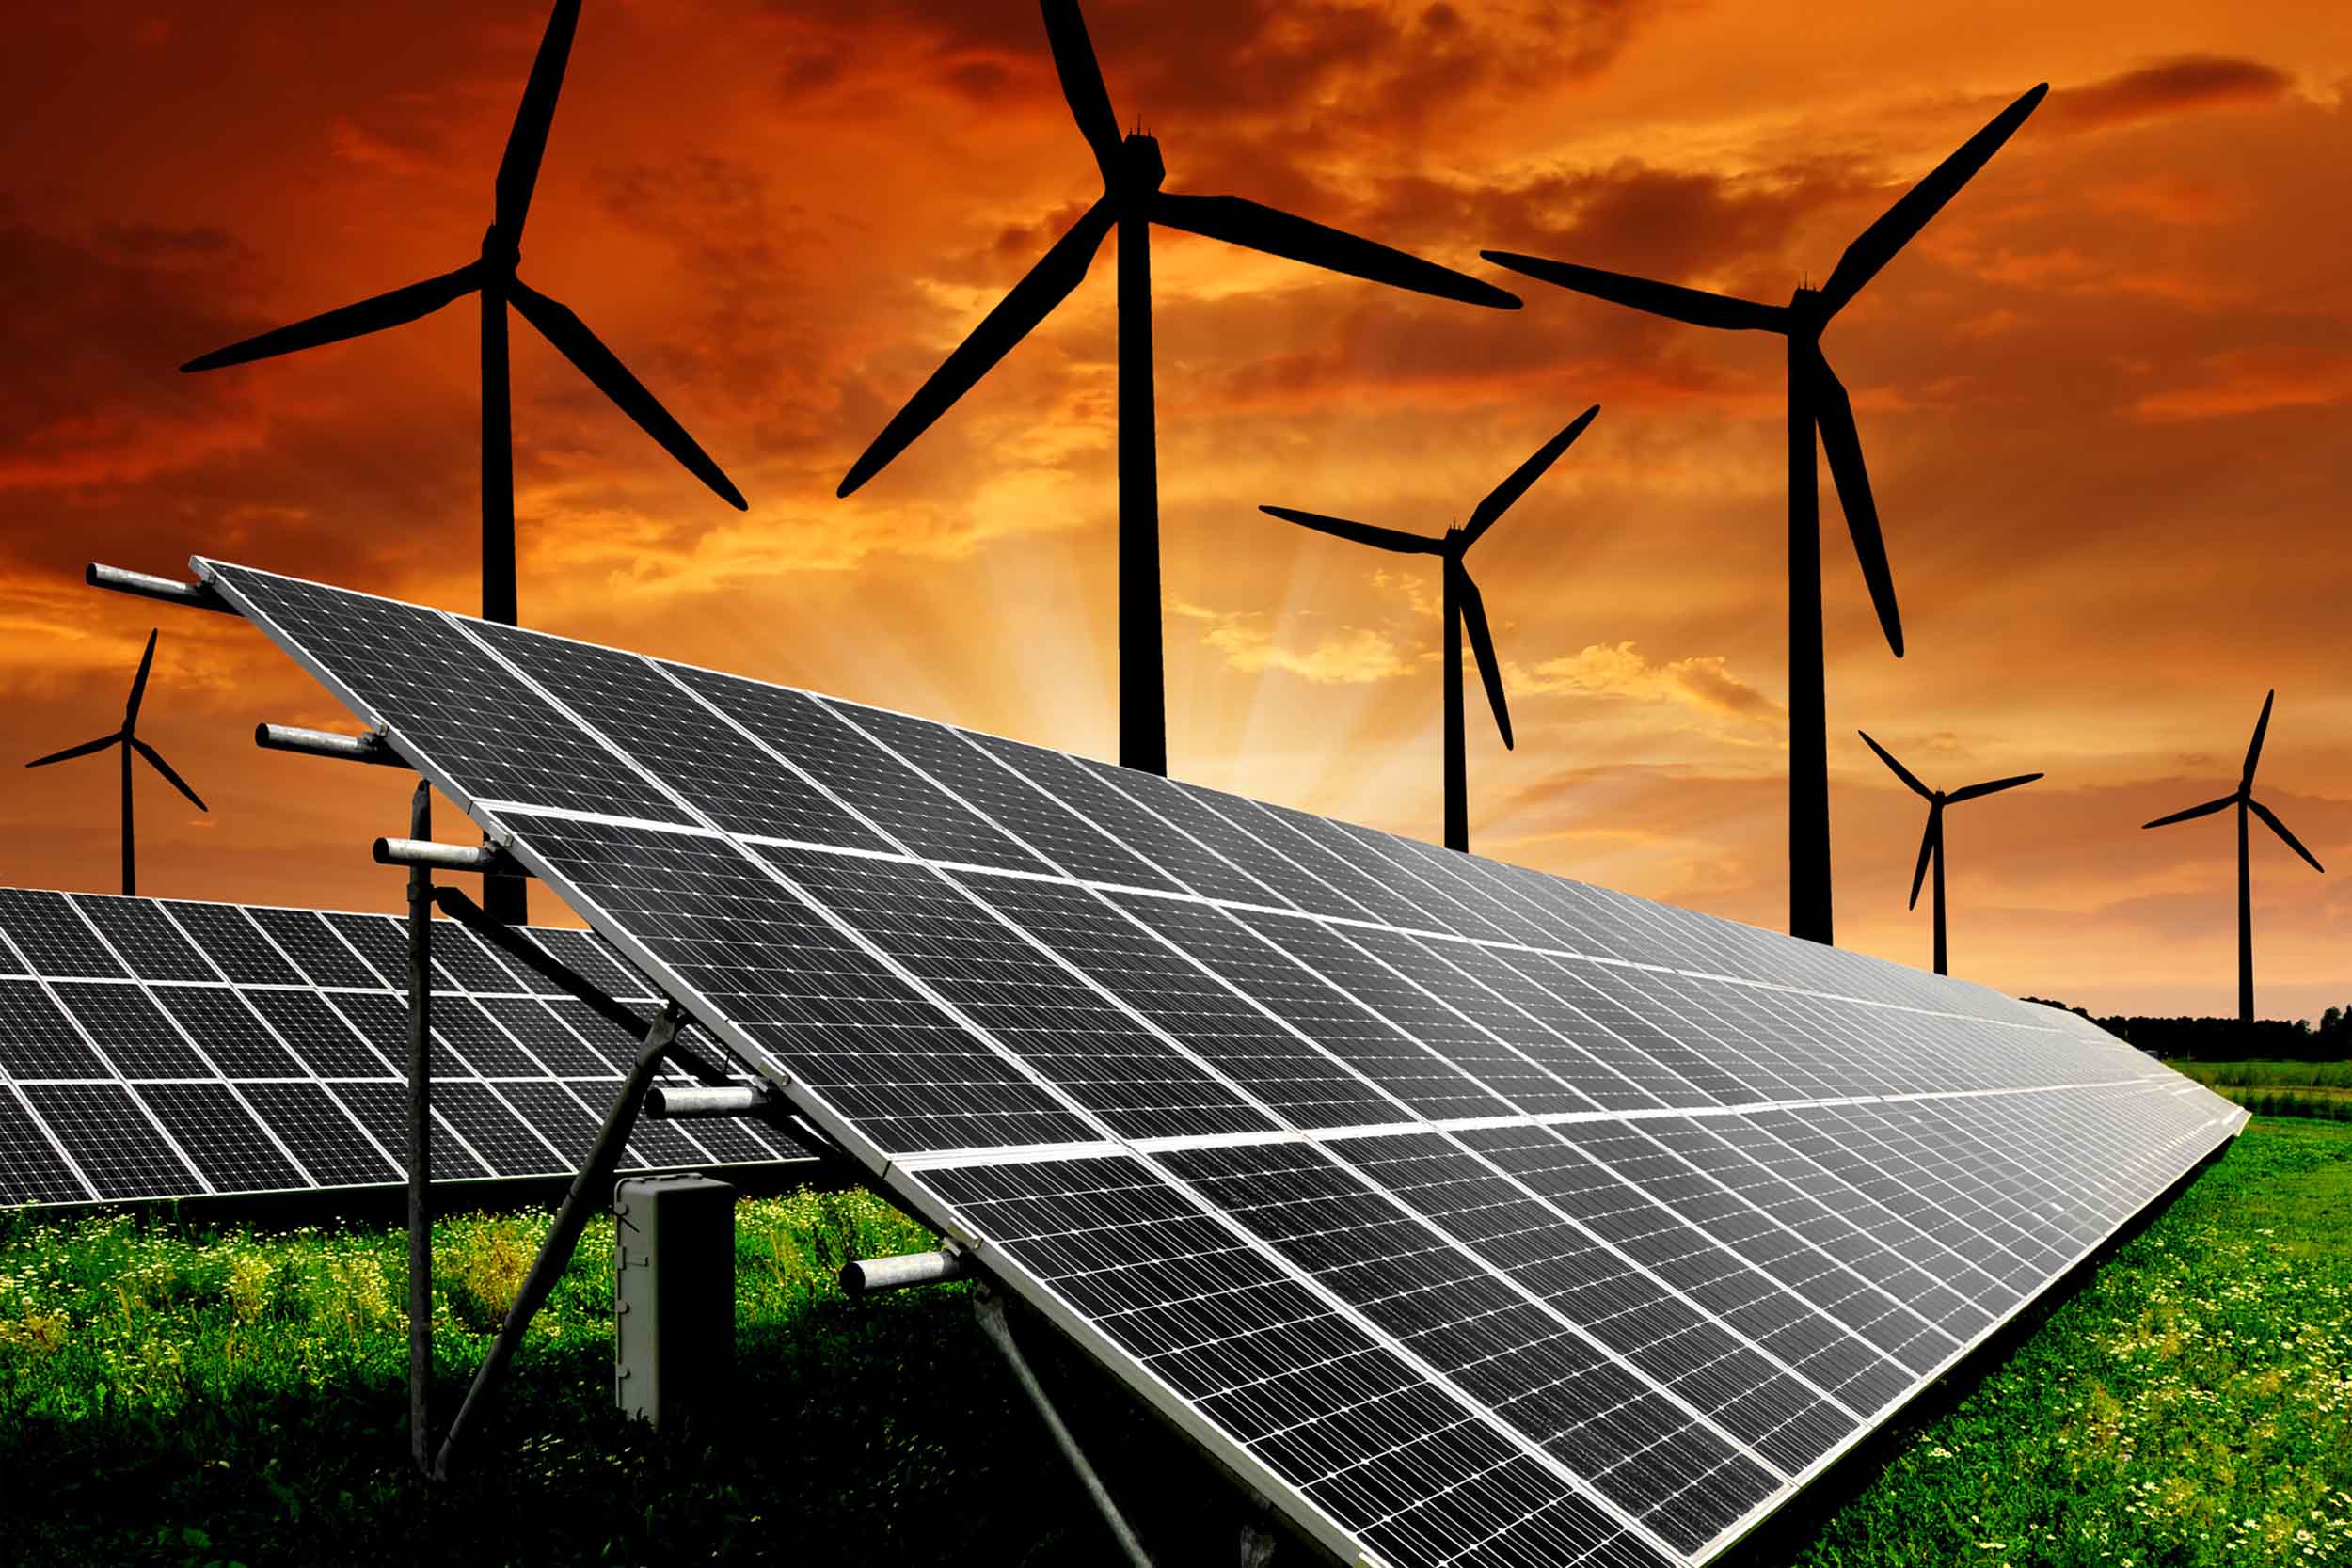 Stock image of a green, grassy field with solar panel arrays, windmills and a rich red sunset